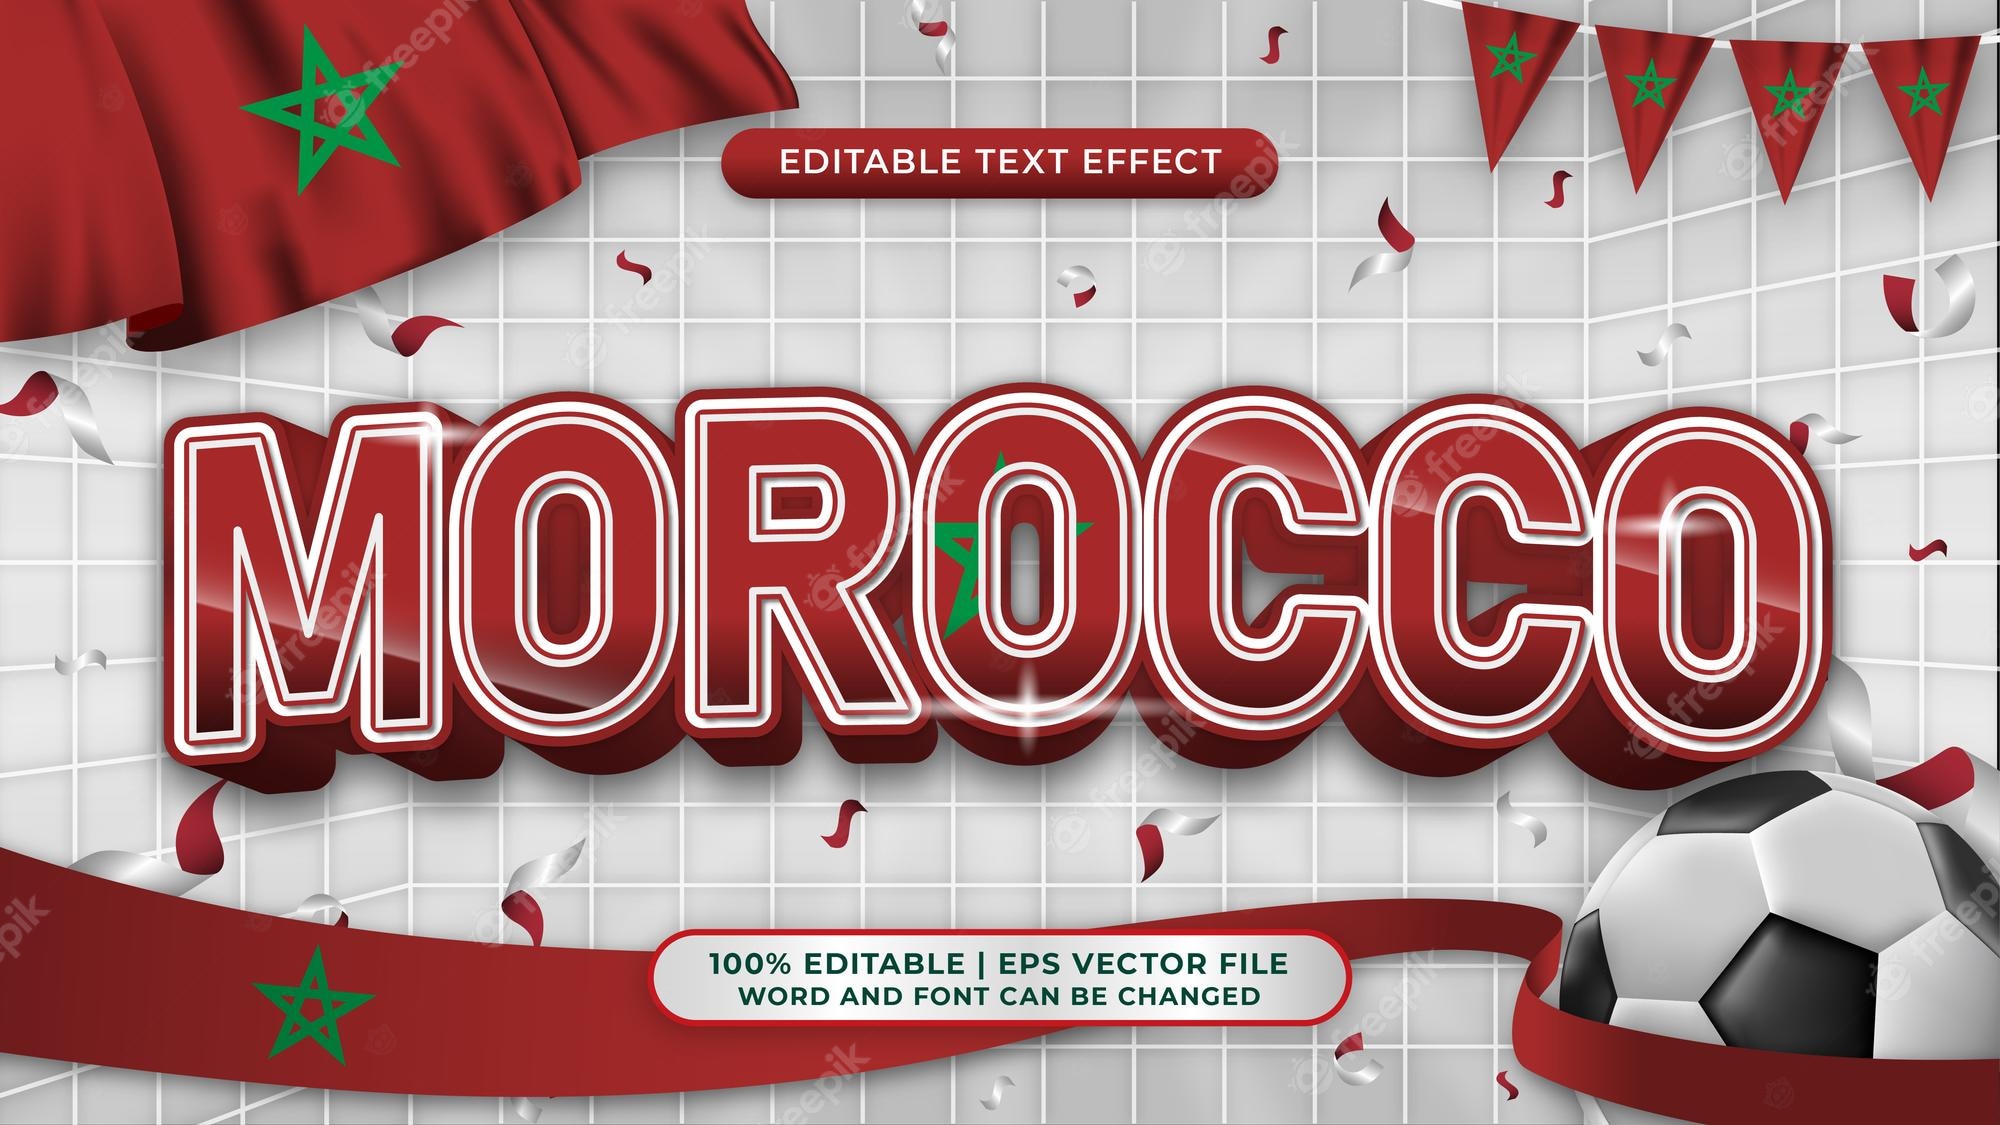 Premium Vector. Morocco football world cup background theme editable text style effect